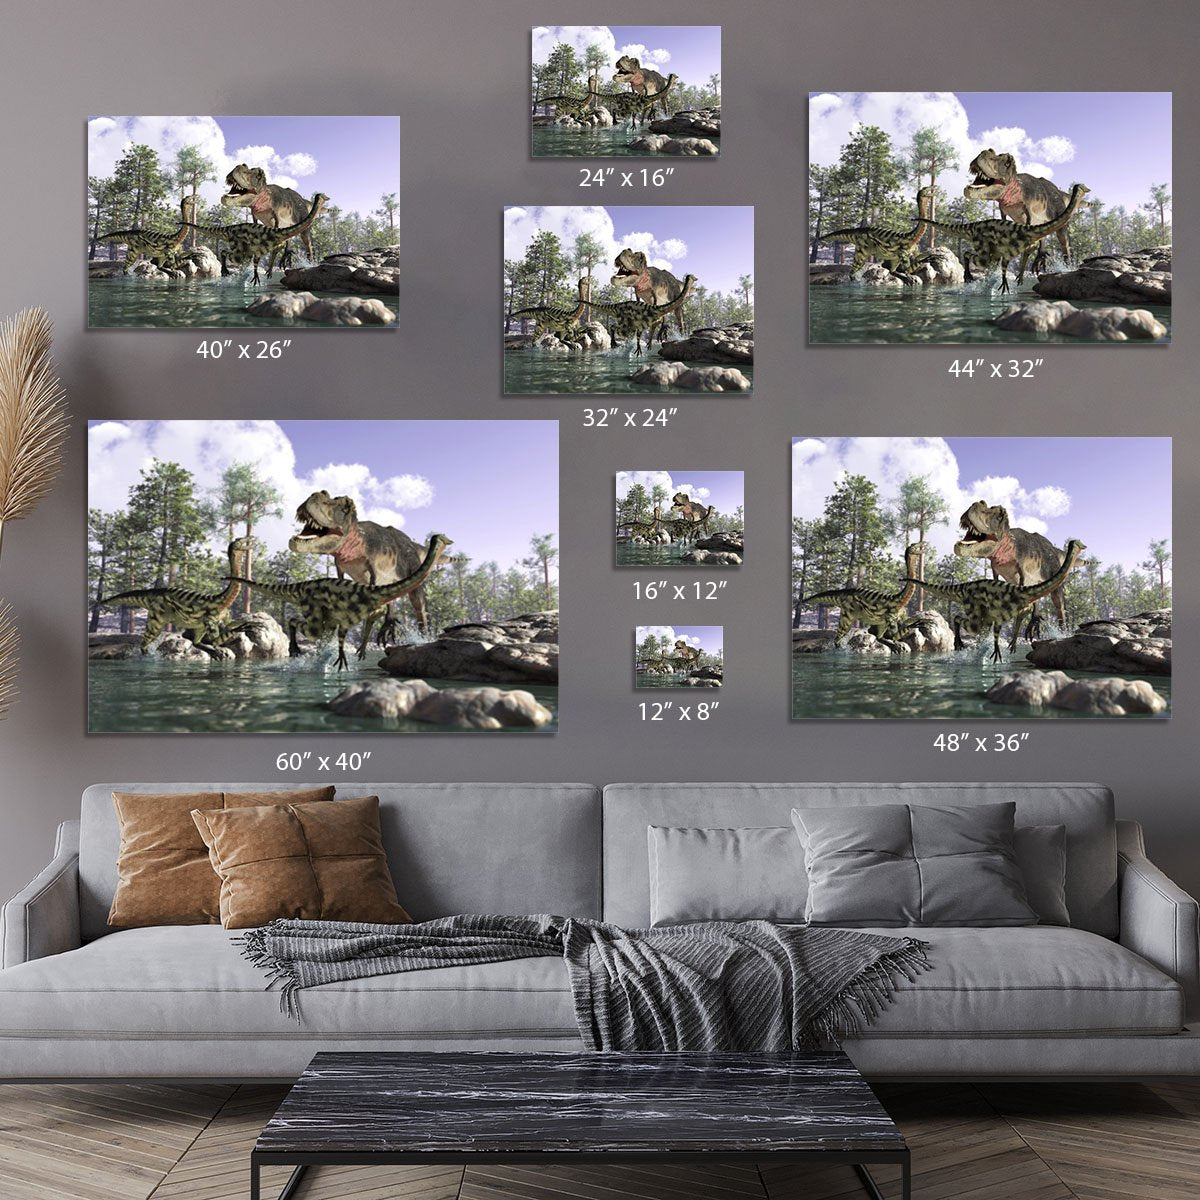 Photorealistic 3 D scene of a Tyrannosaurus Rex Canvas Print or Poster